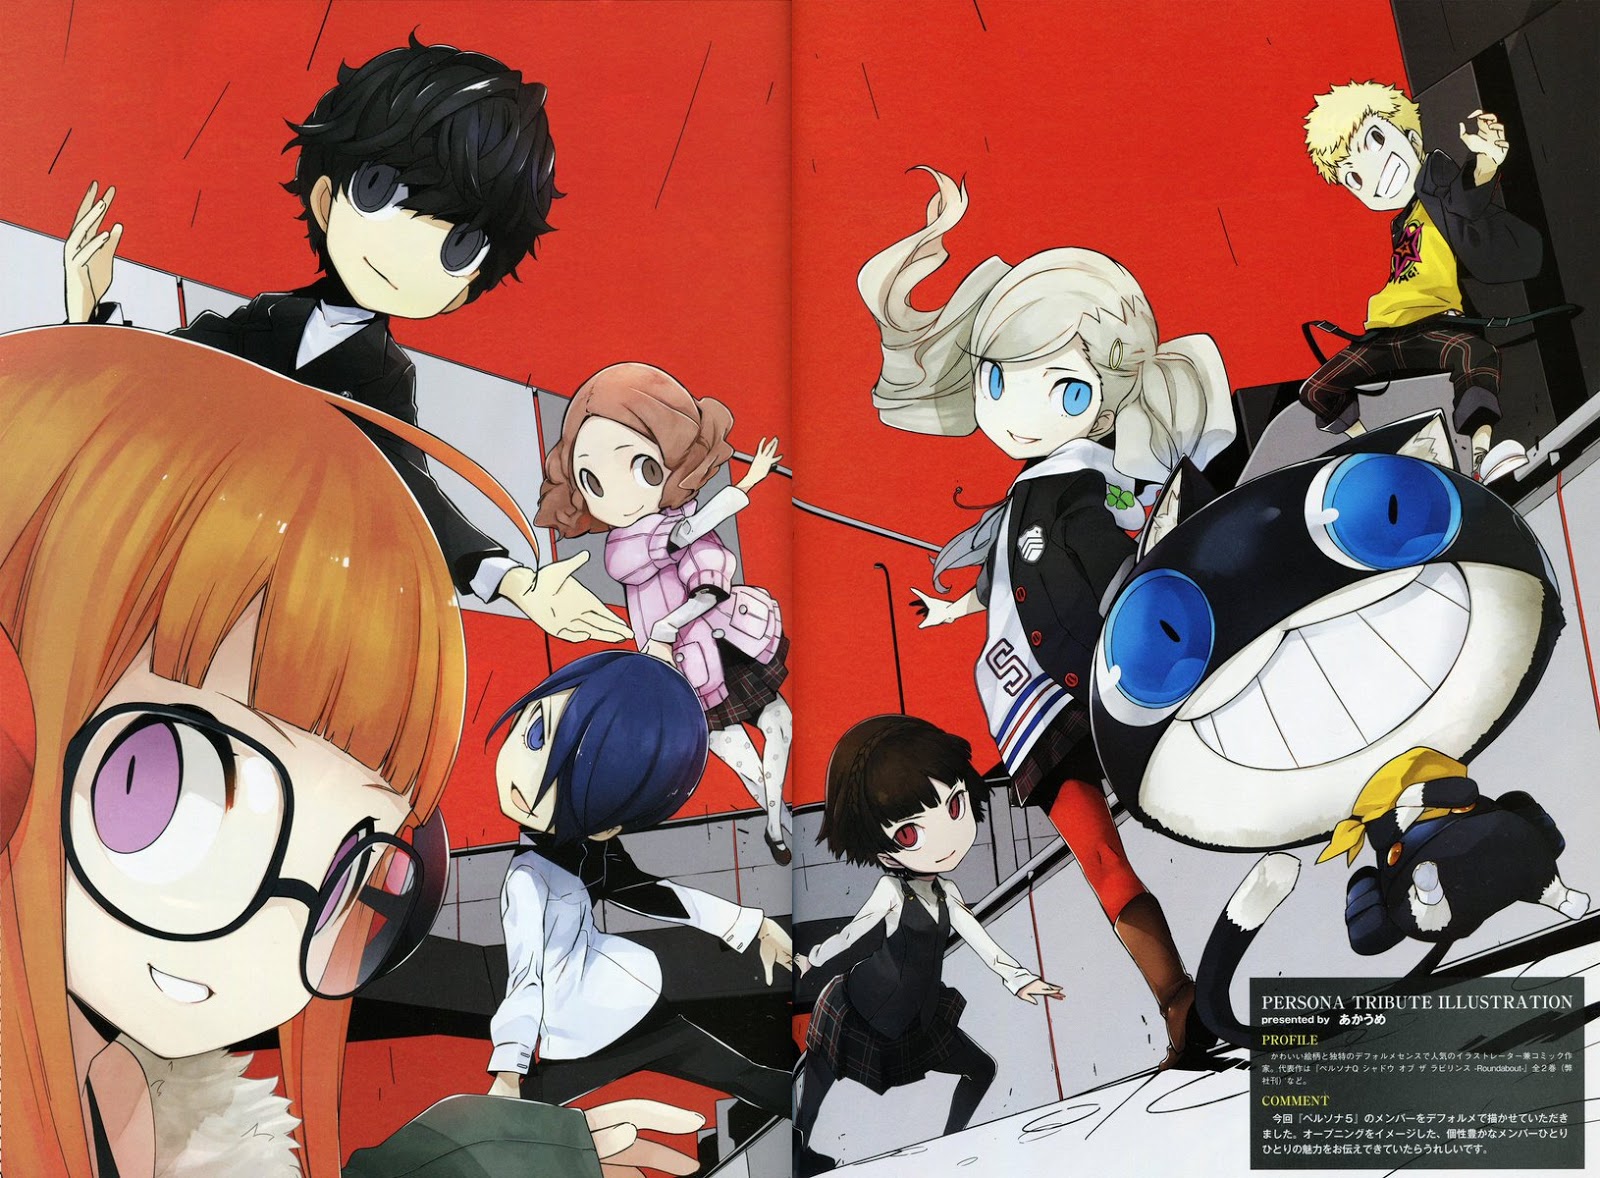 Persona is Cashing In!